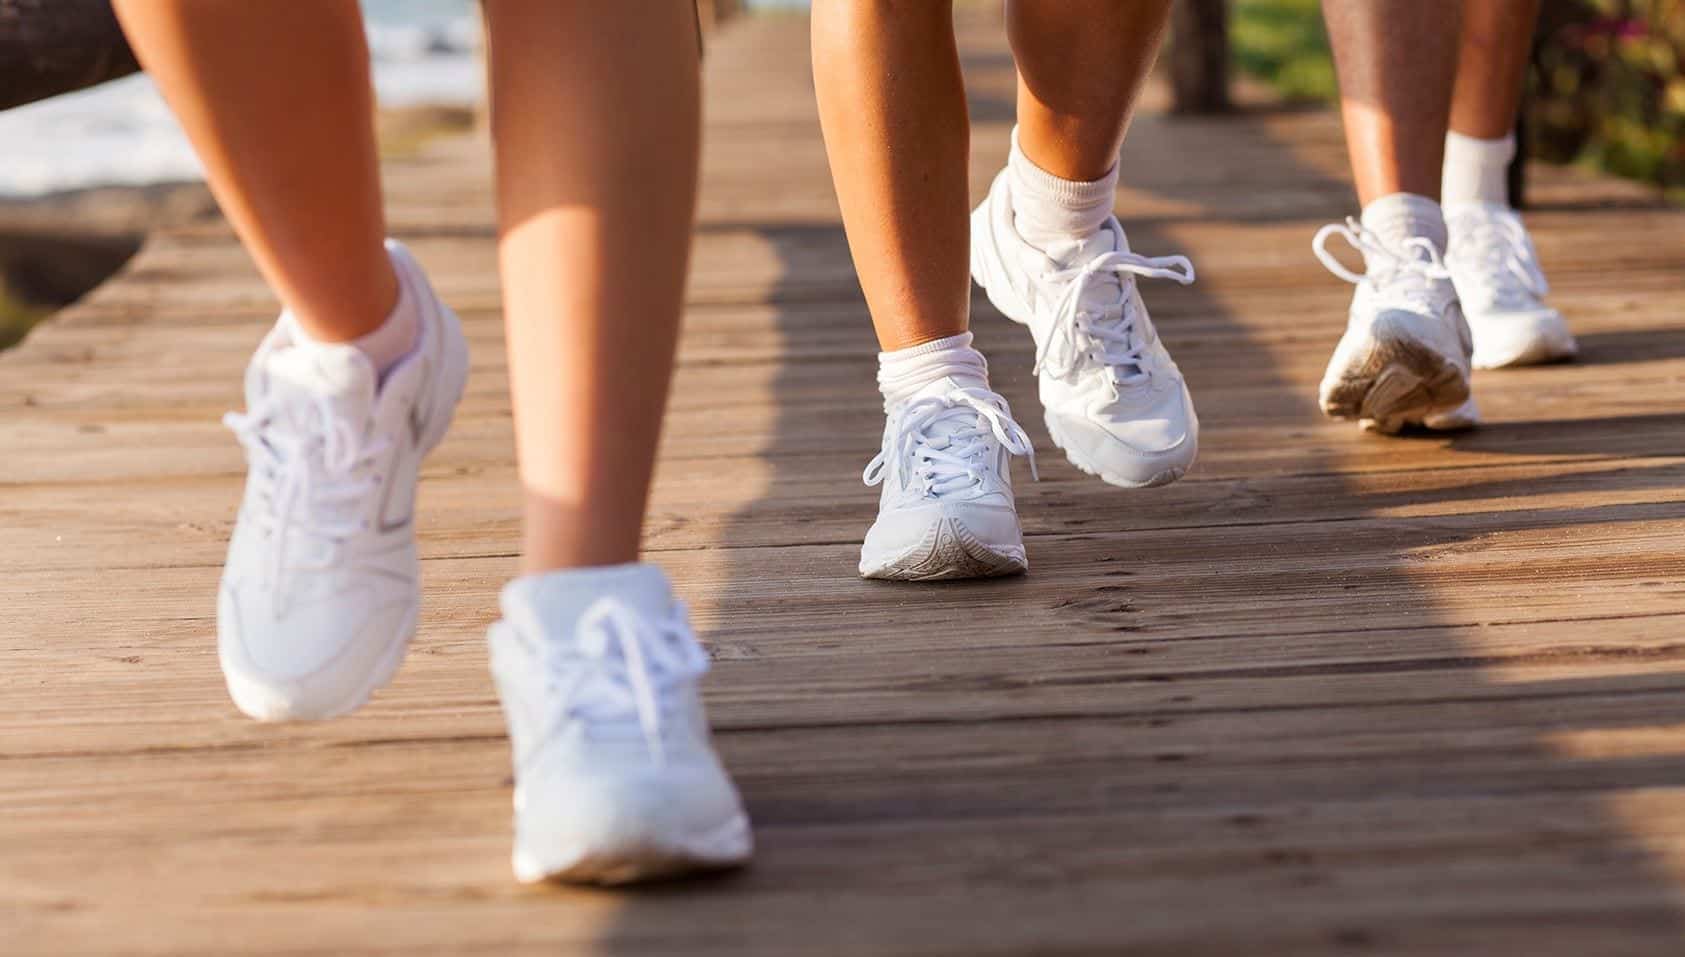 “Stepping into Spring” challenge for Muscatine Walking Club